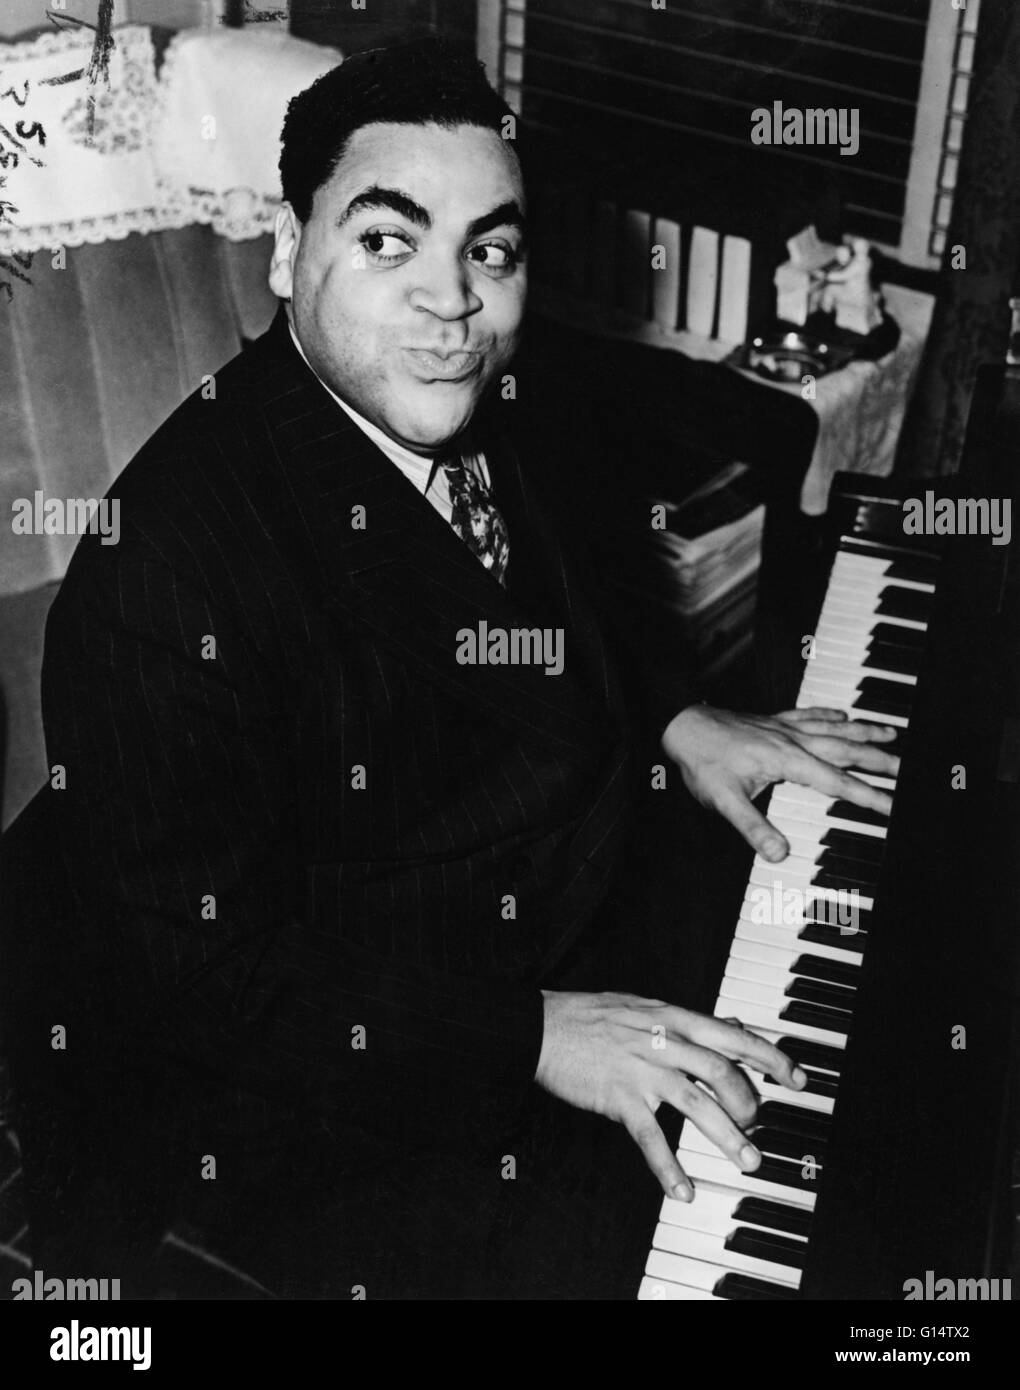 Waller playing the piano in 1938. Fats Waller (May 21, 1904 - December 15, 1943), born Thomas Wright Waller, was an African-American jazz pianist, organist, composer, singer, and comedic entertainer. He was one of the most popular performers of his era, f Stock Photo